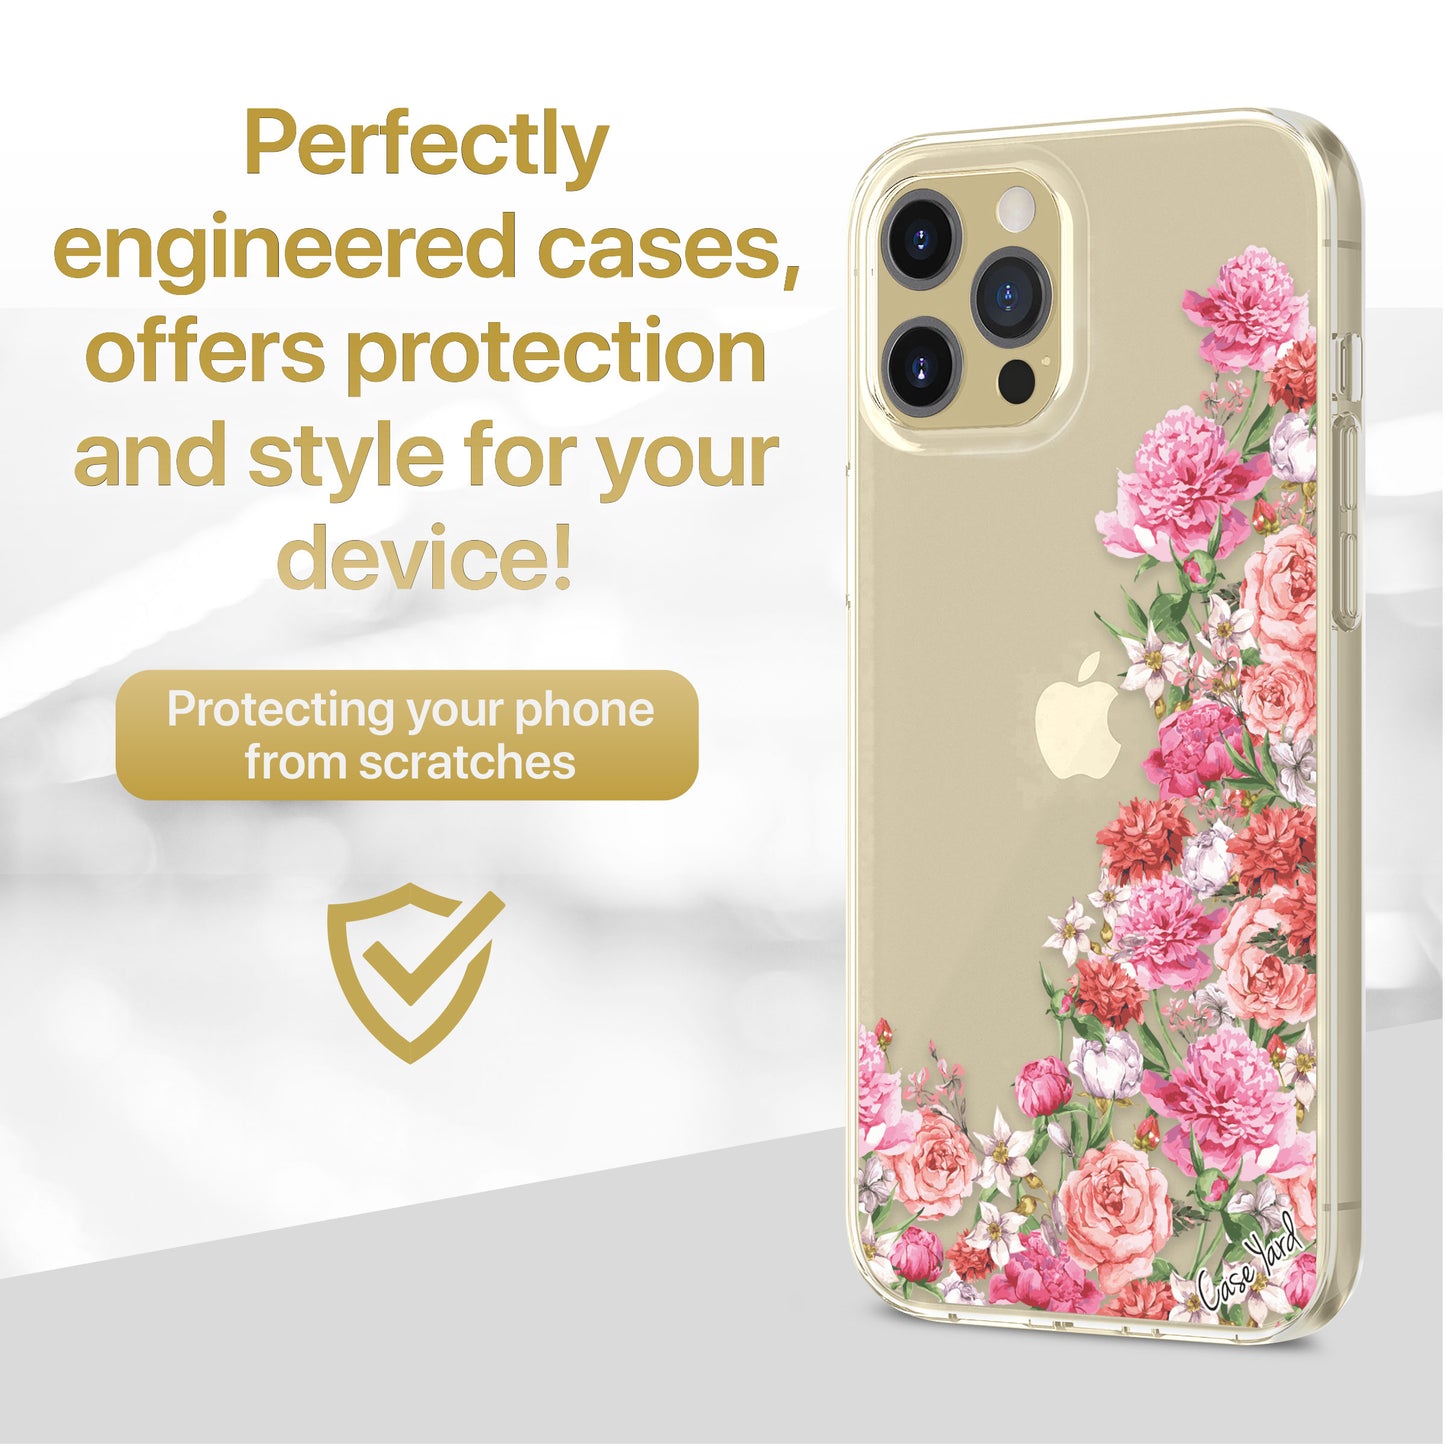 TPU Clear case with (Garden Roses) Design for iPhone & Samsung Phones